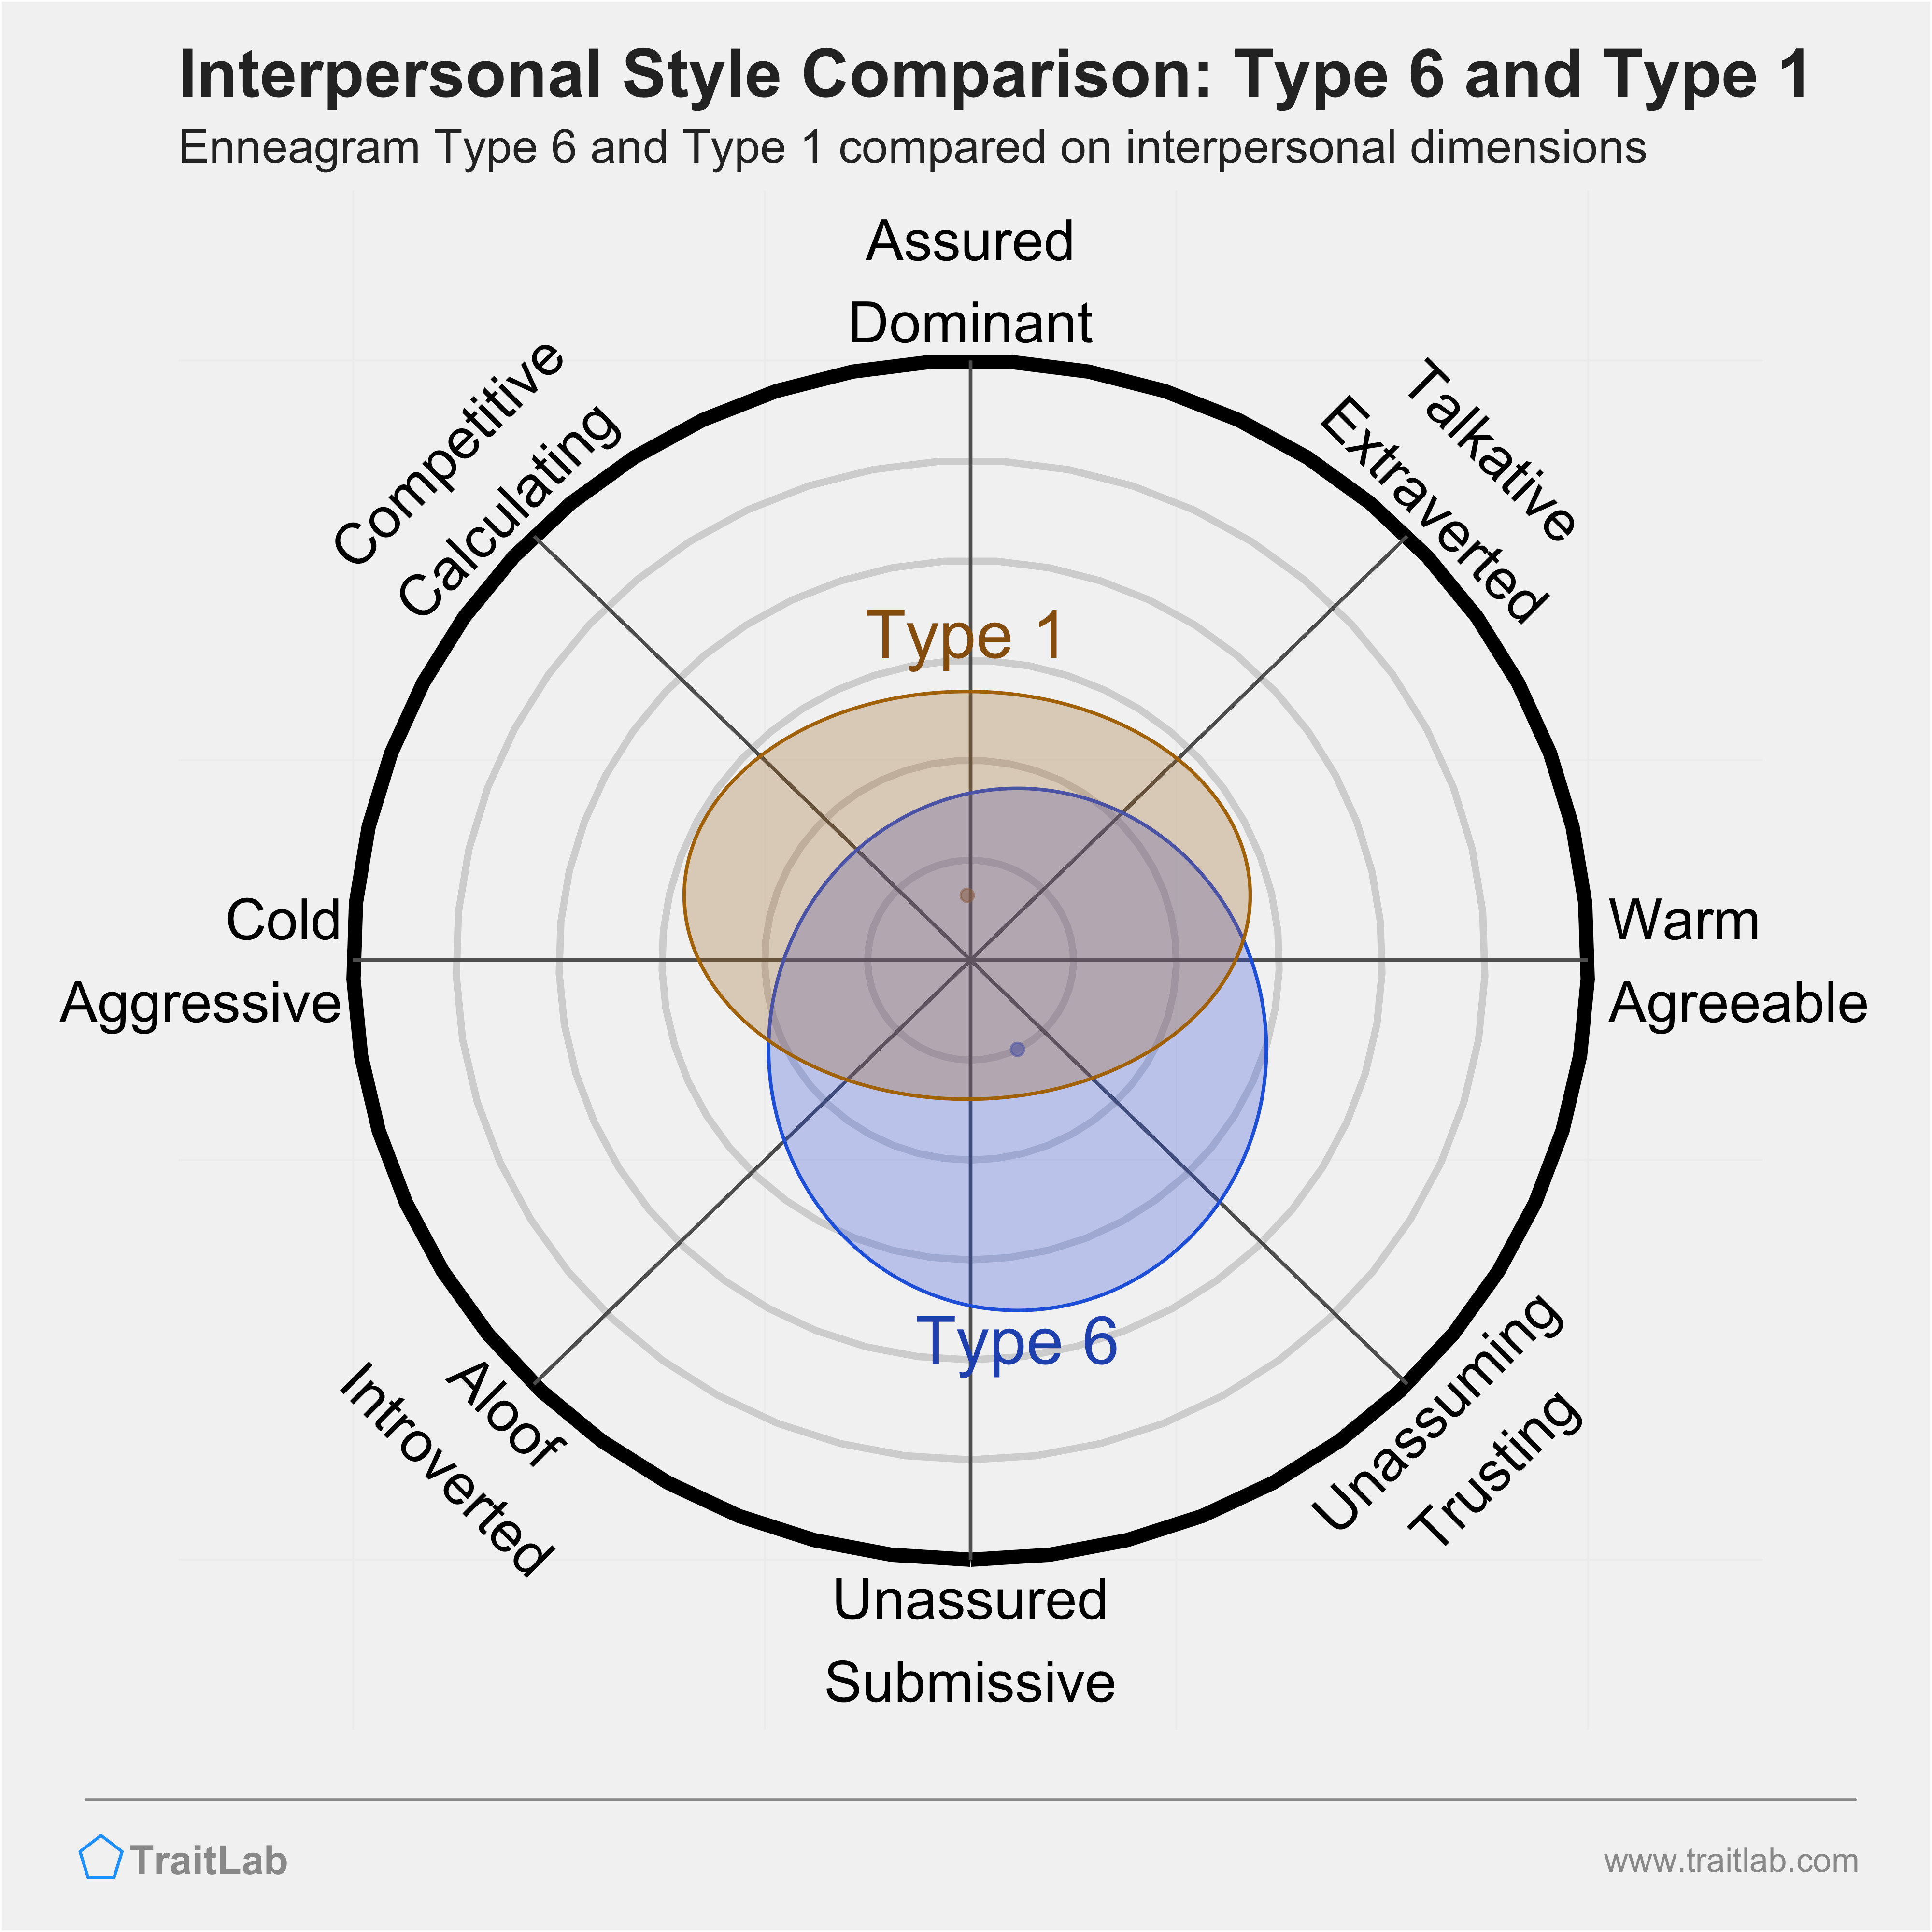 Enneagram Type 6 and Type 1 comparison across interpersonal dimensions